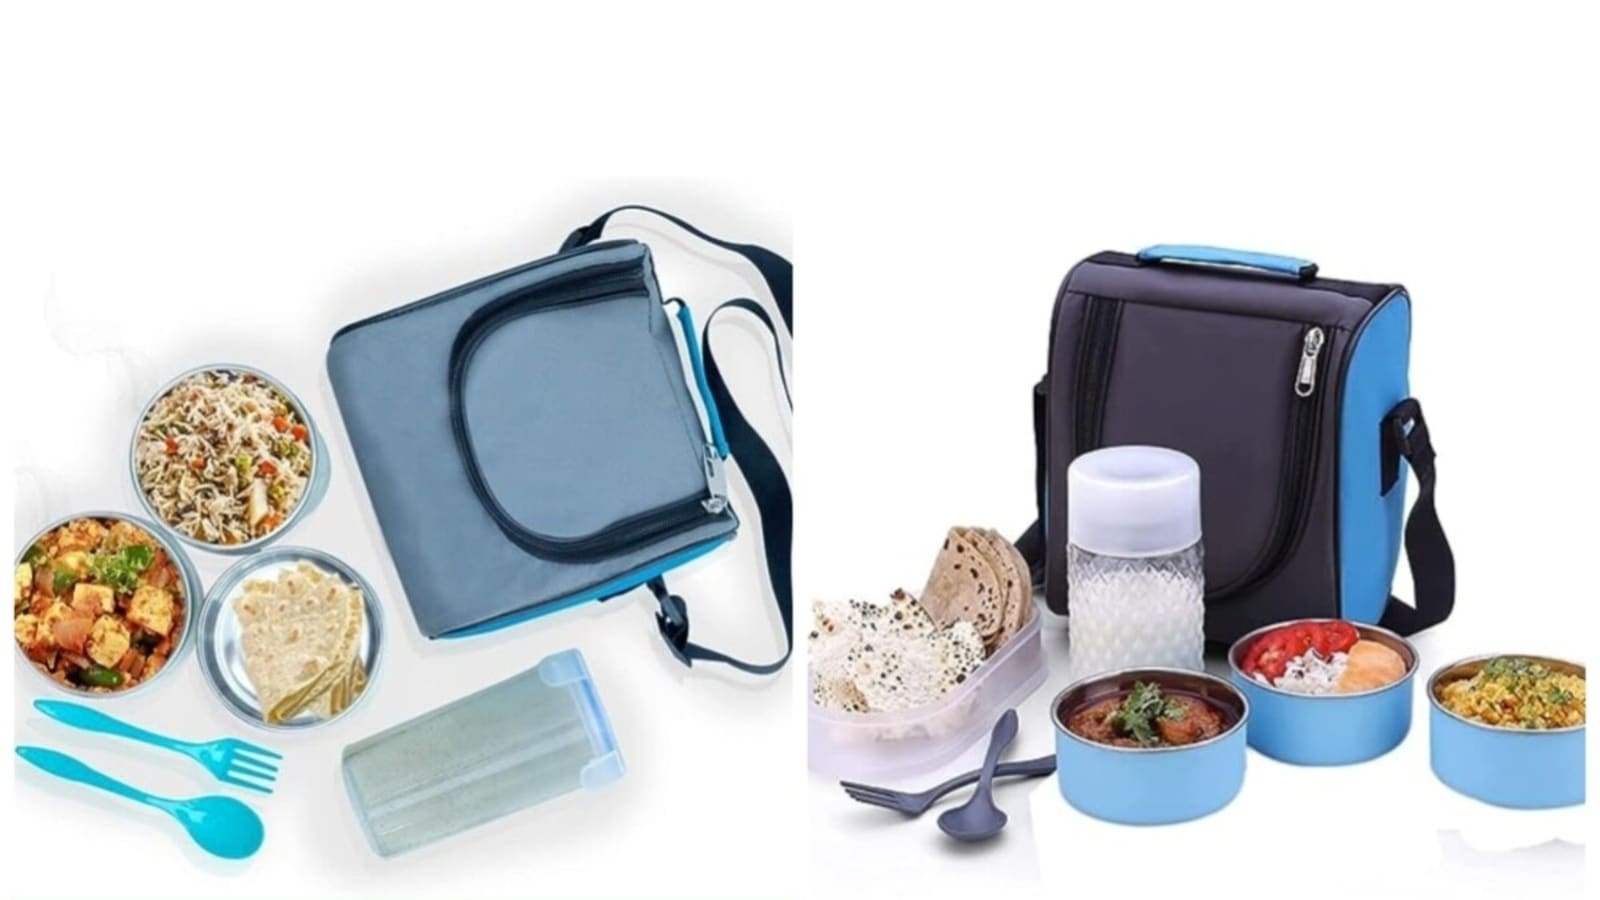 Home Puff Set of 4 Stainless Steel Insulated Lunch Boxes for